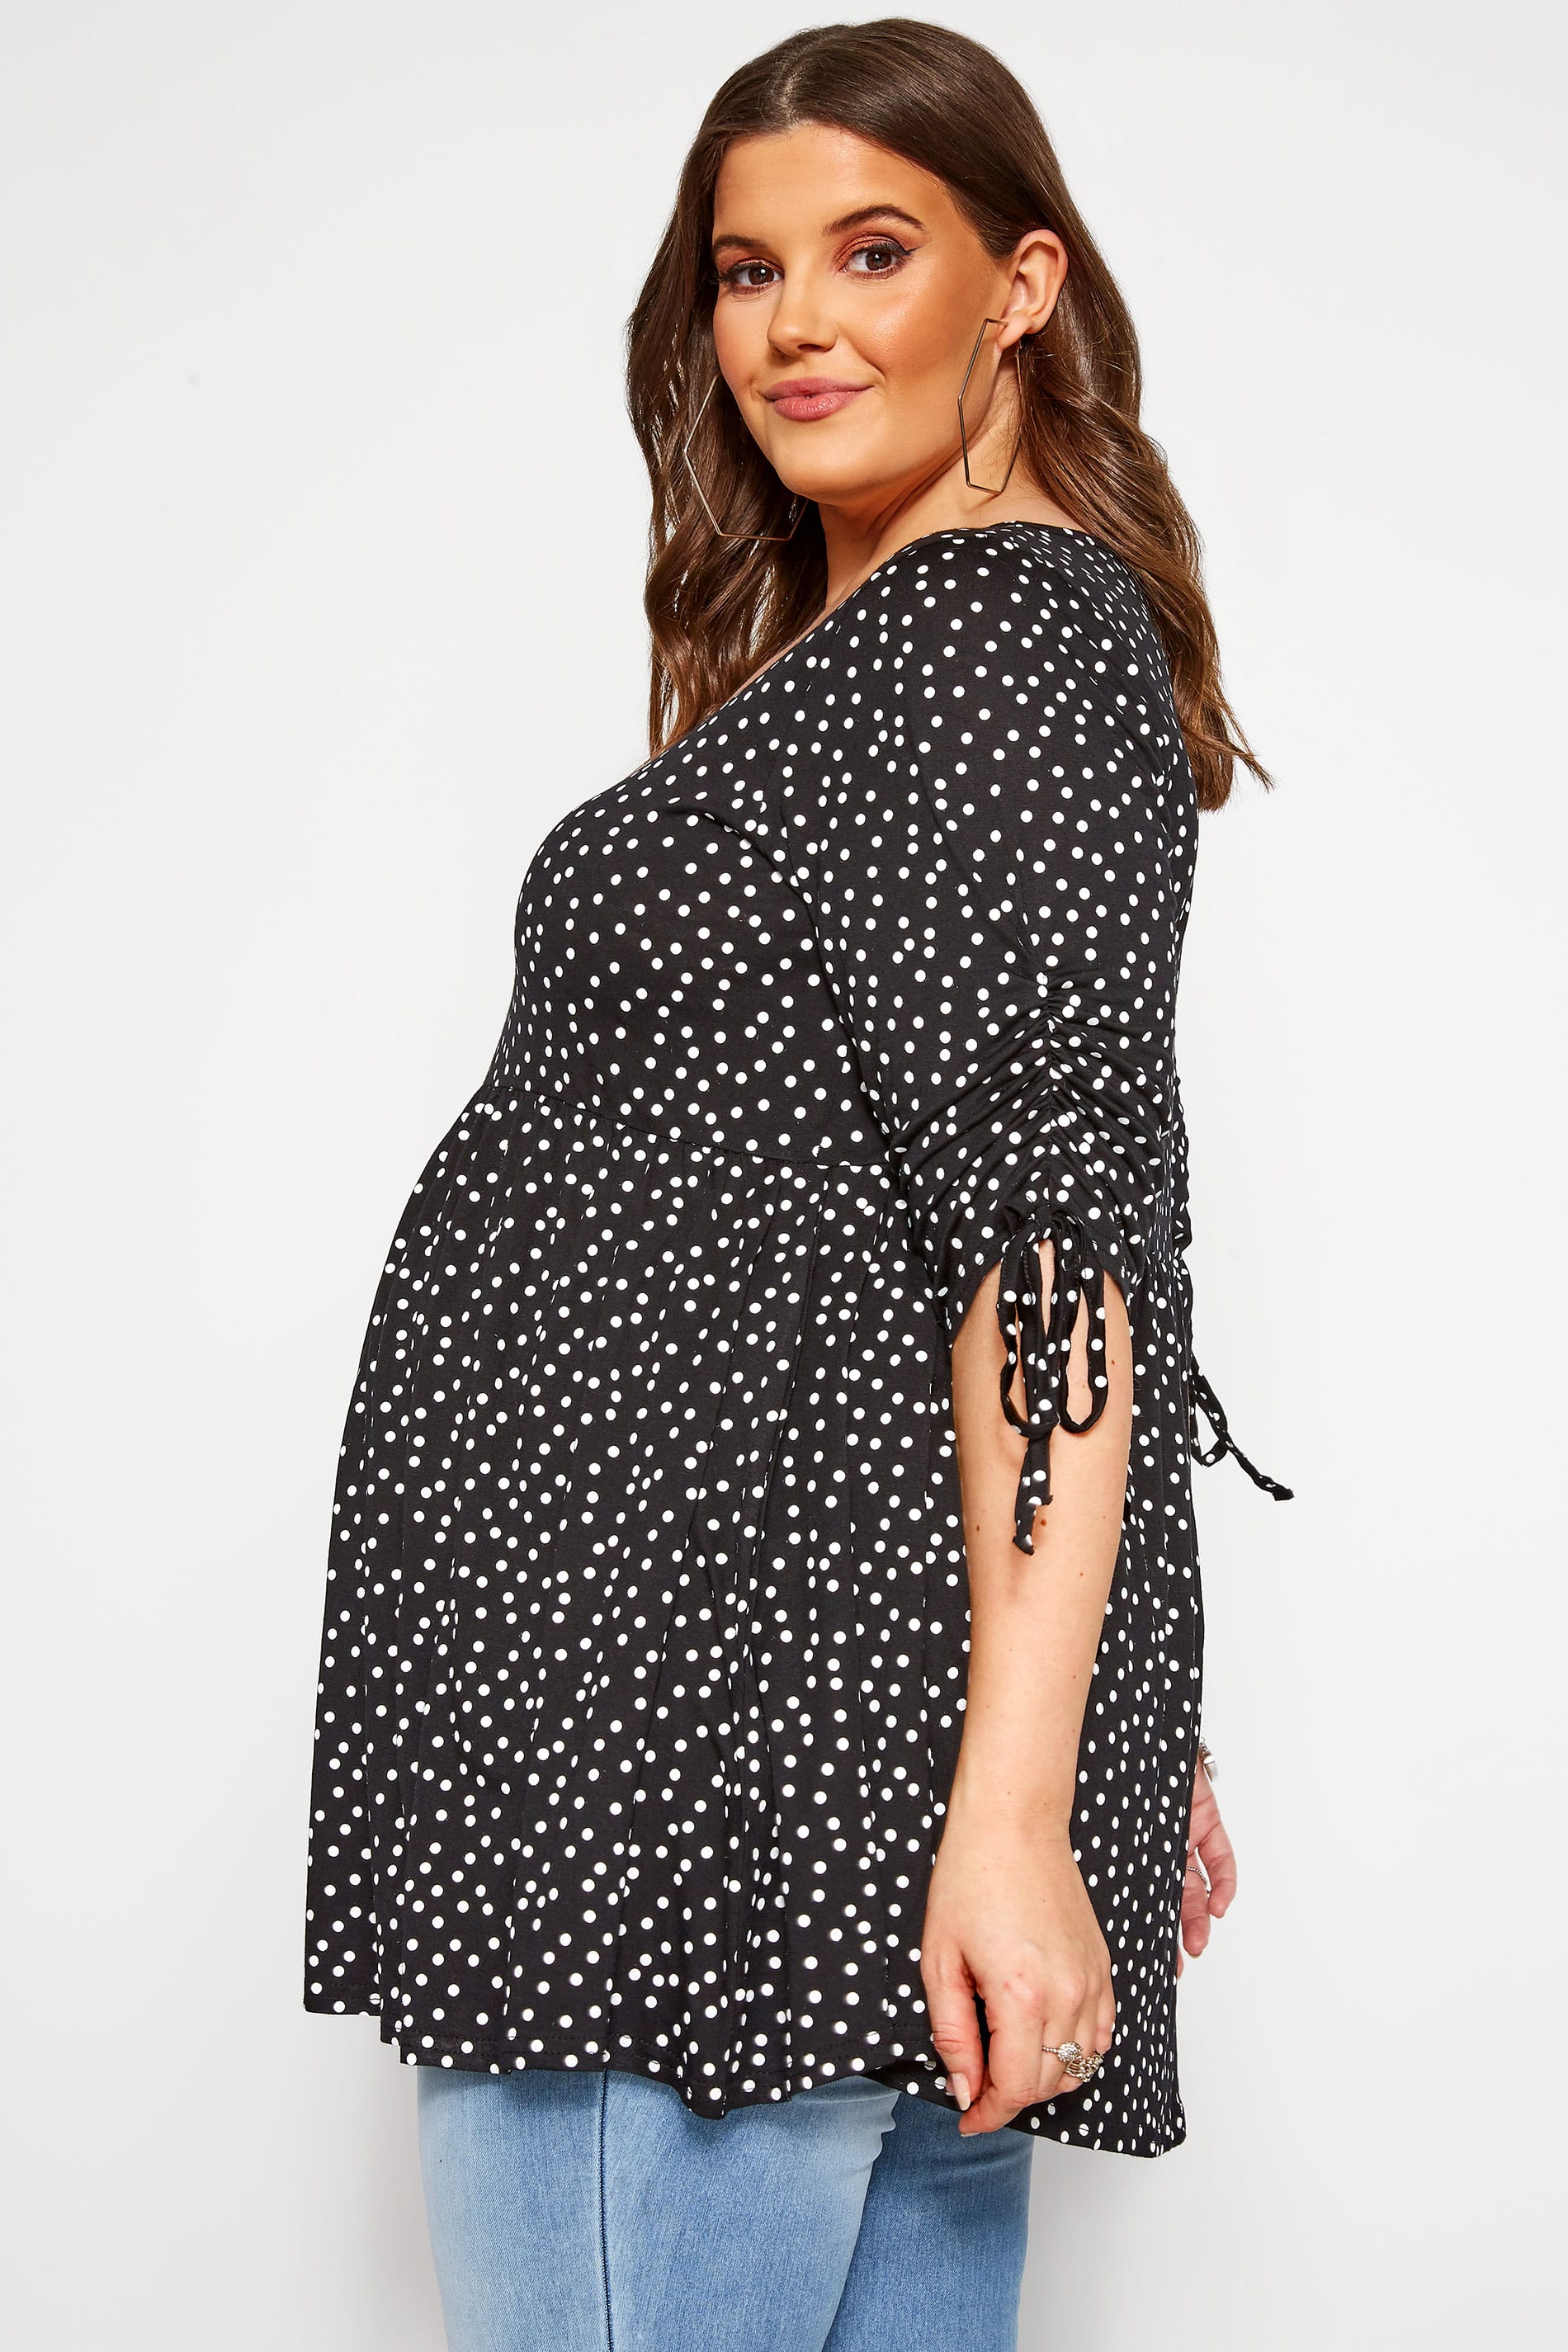 BUMP IT UP MATERNITY Black Polka Dot Smock Top | Yours Clothing